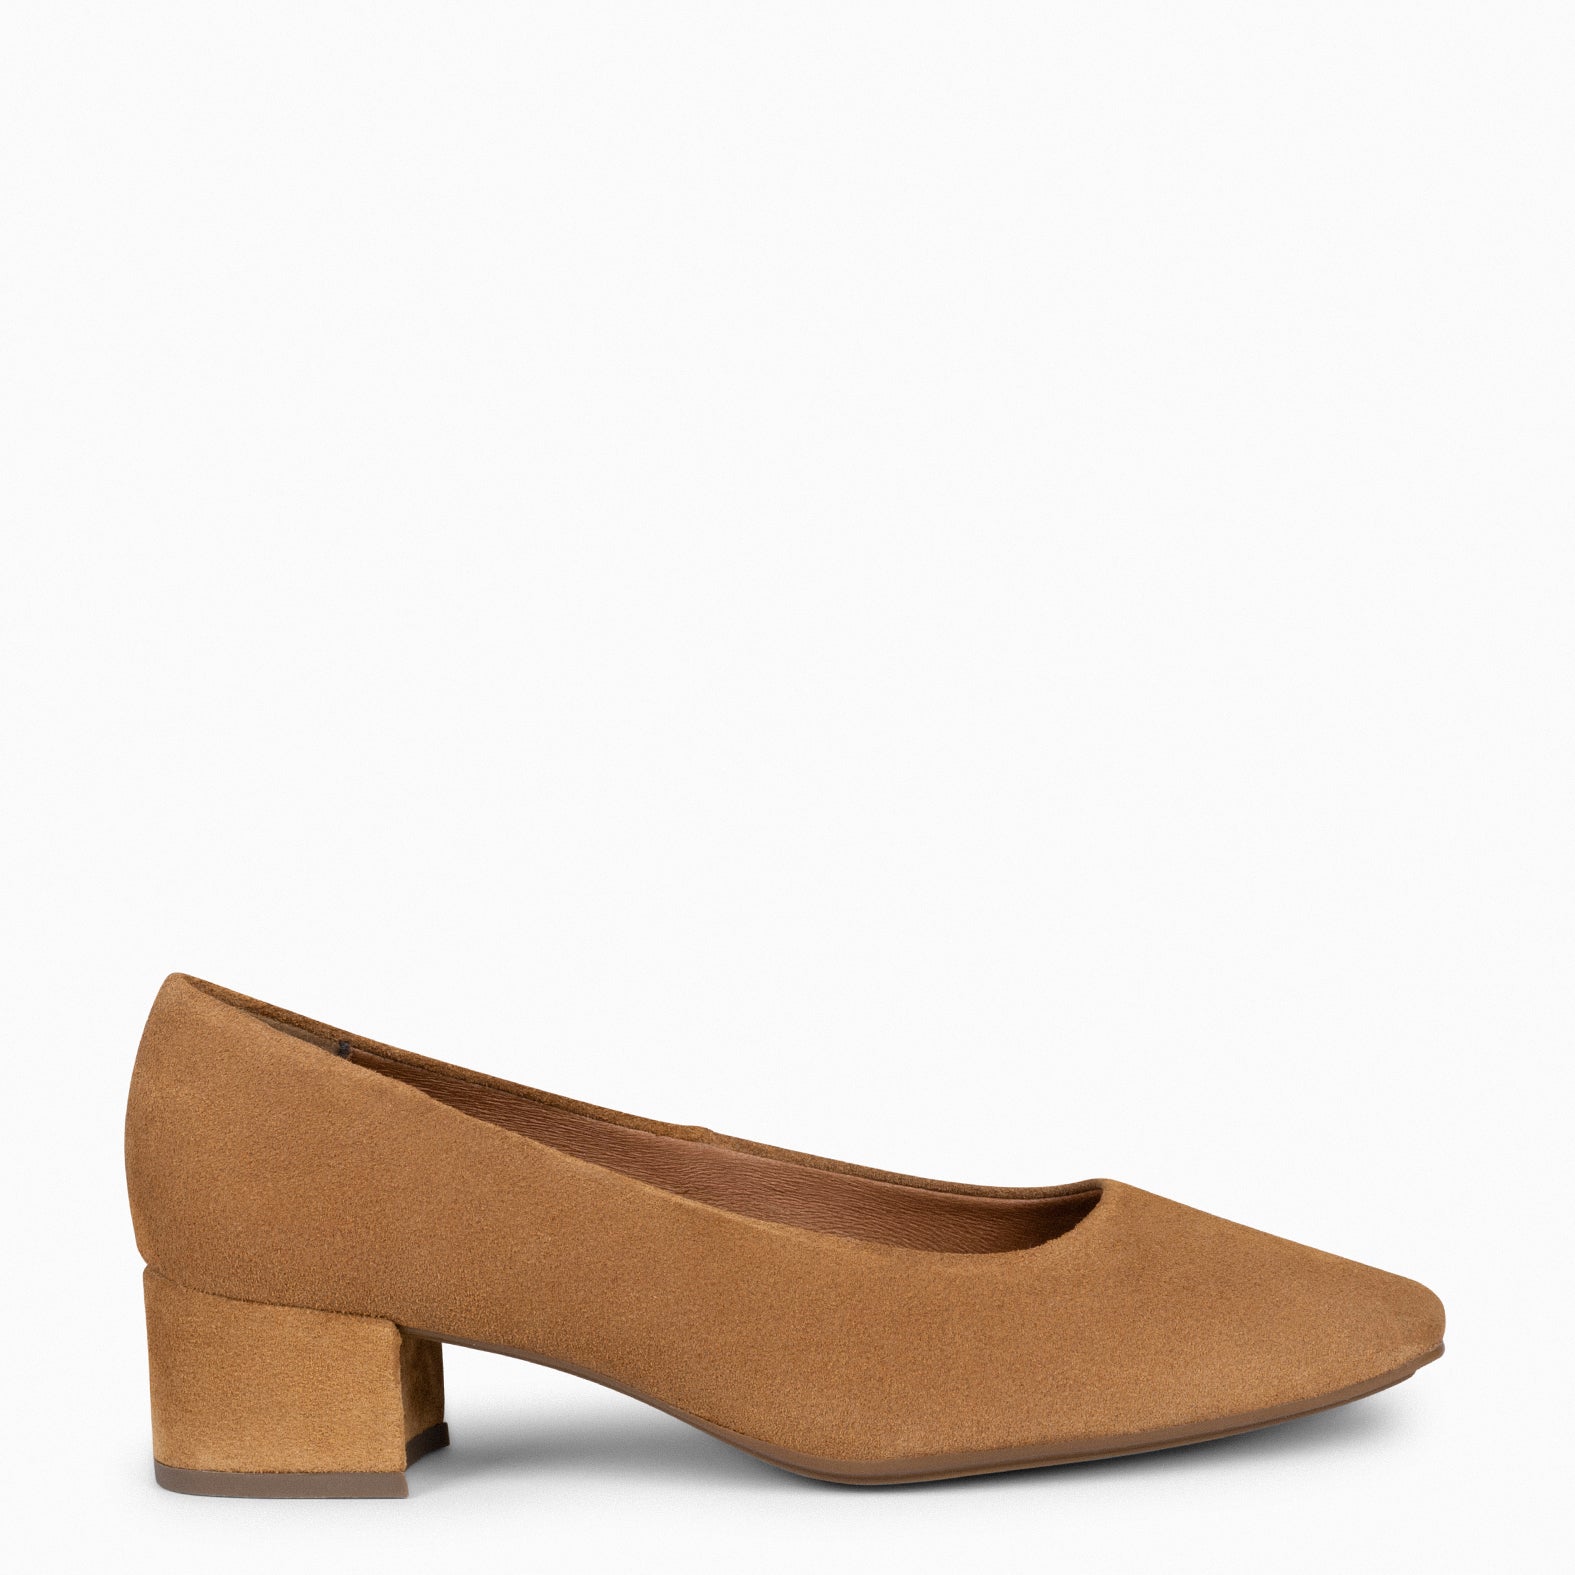 URBAN LADY – TAN suede leather low heels 